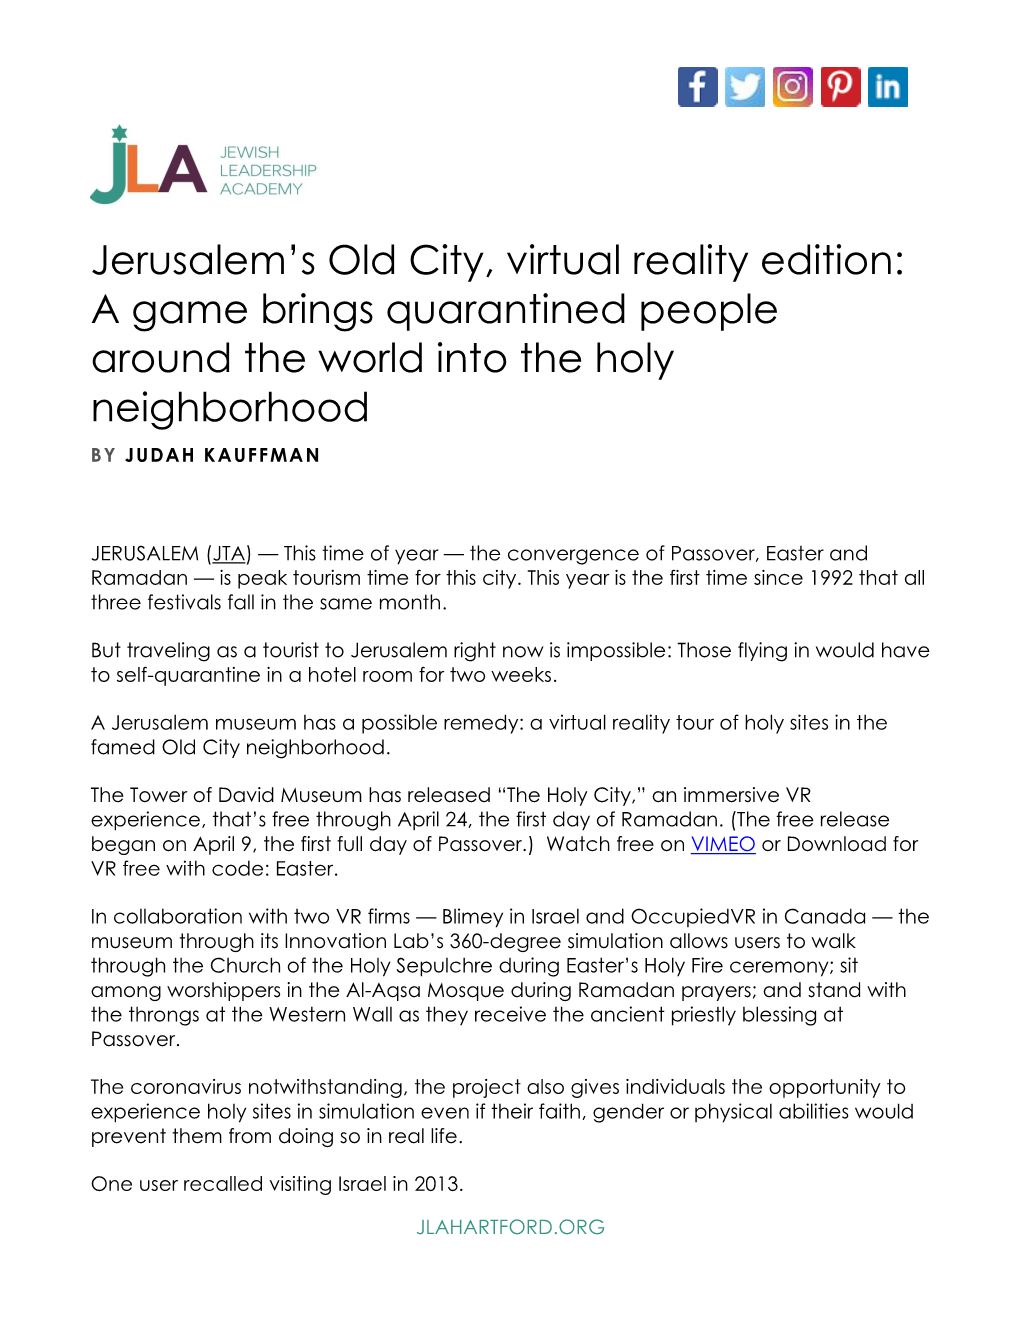 Jerusalem's Old City, Virtual Reality Edition: a Game Brings Quarantined People Around the World Into the Holy Neighborhood